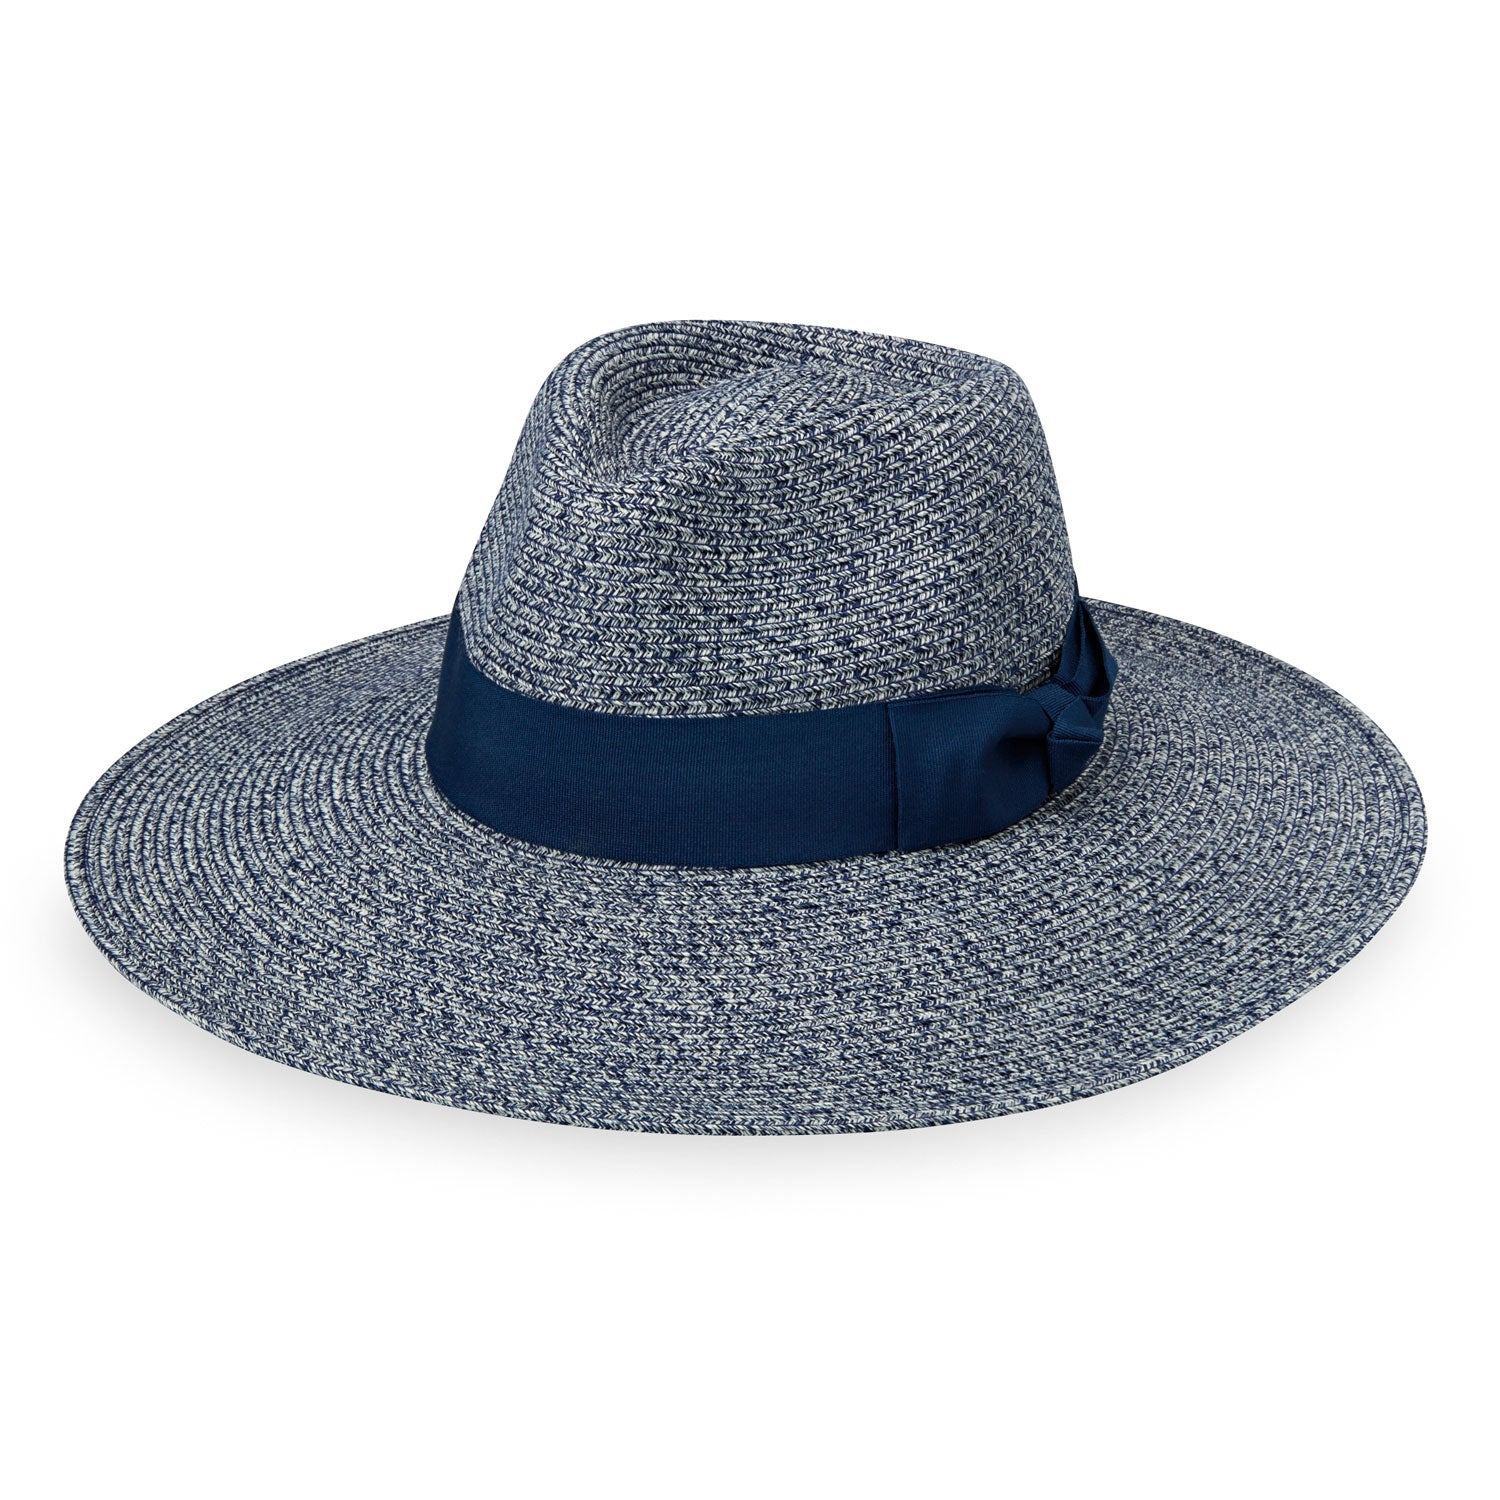 Featuring Ladies' Packable Big Wide Brim Fedora Style St. Lucia Beach Sun Hat from Wallaroo